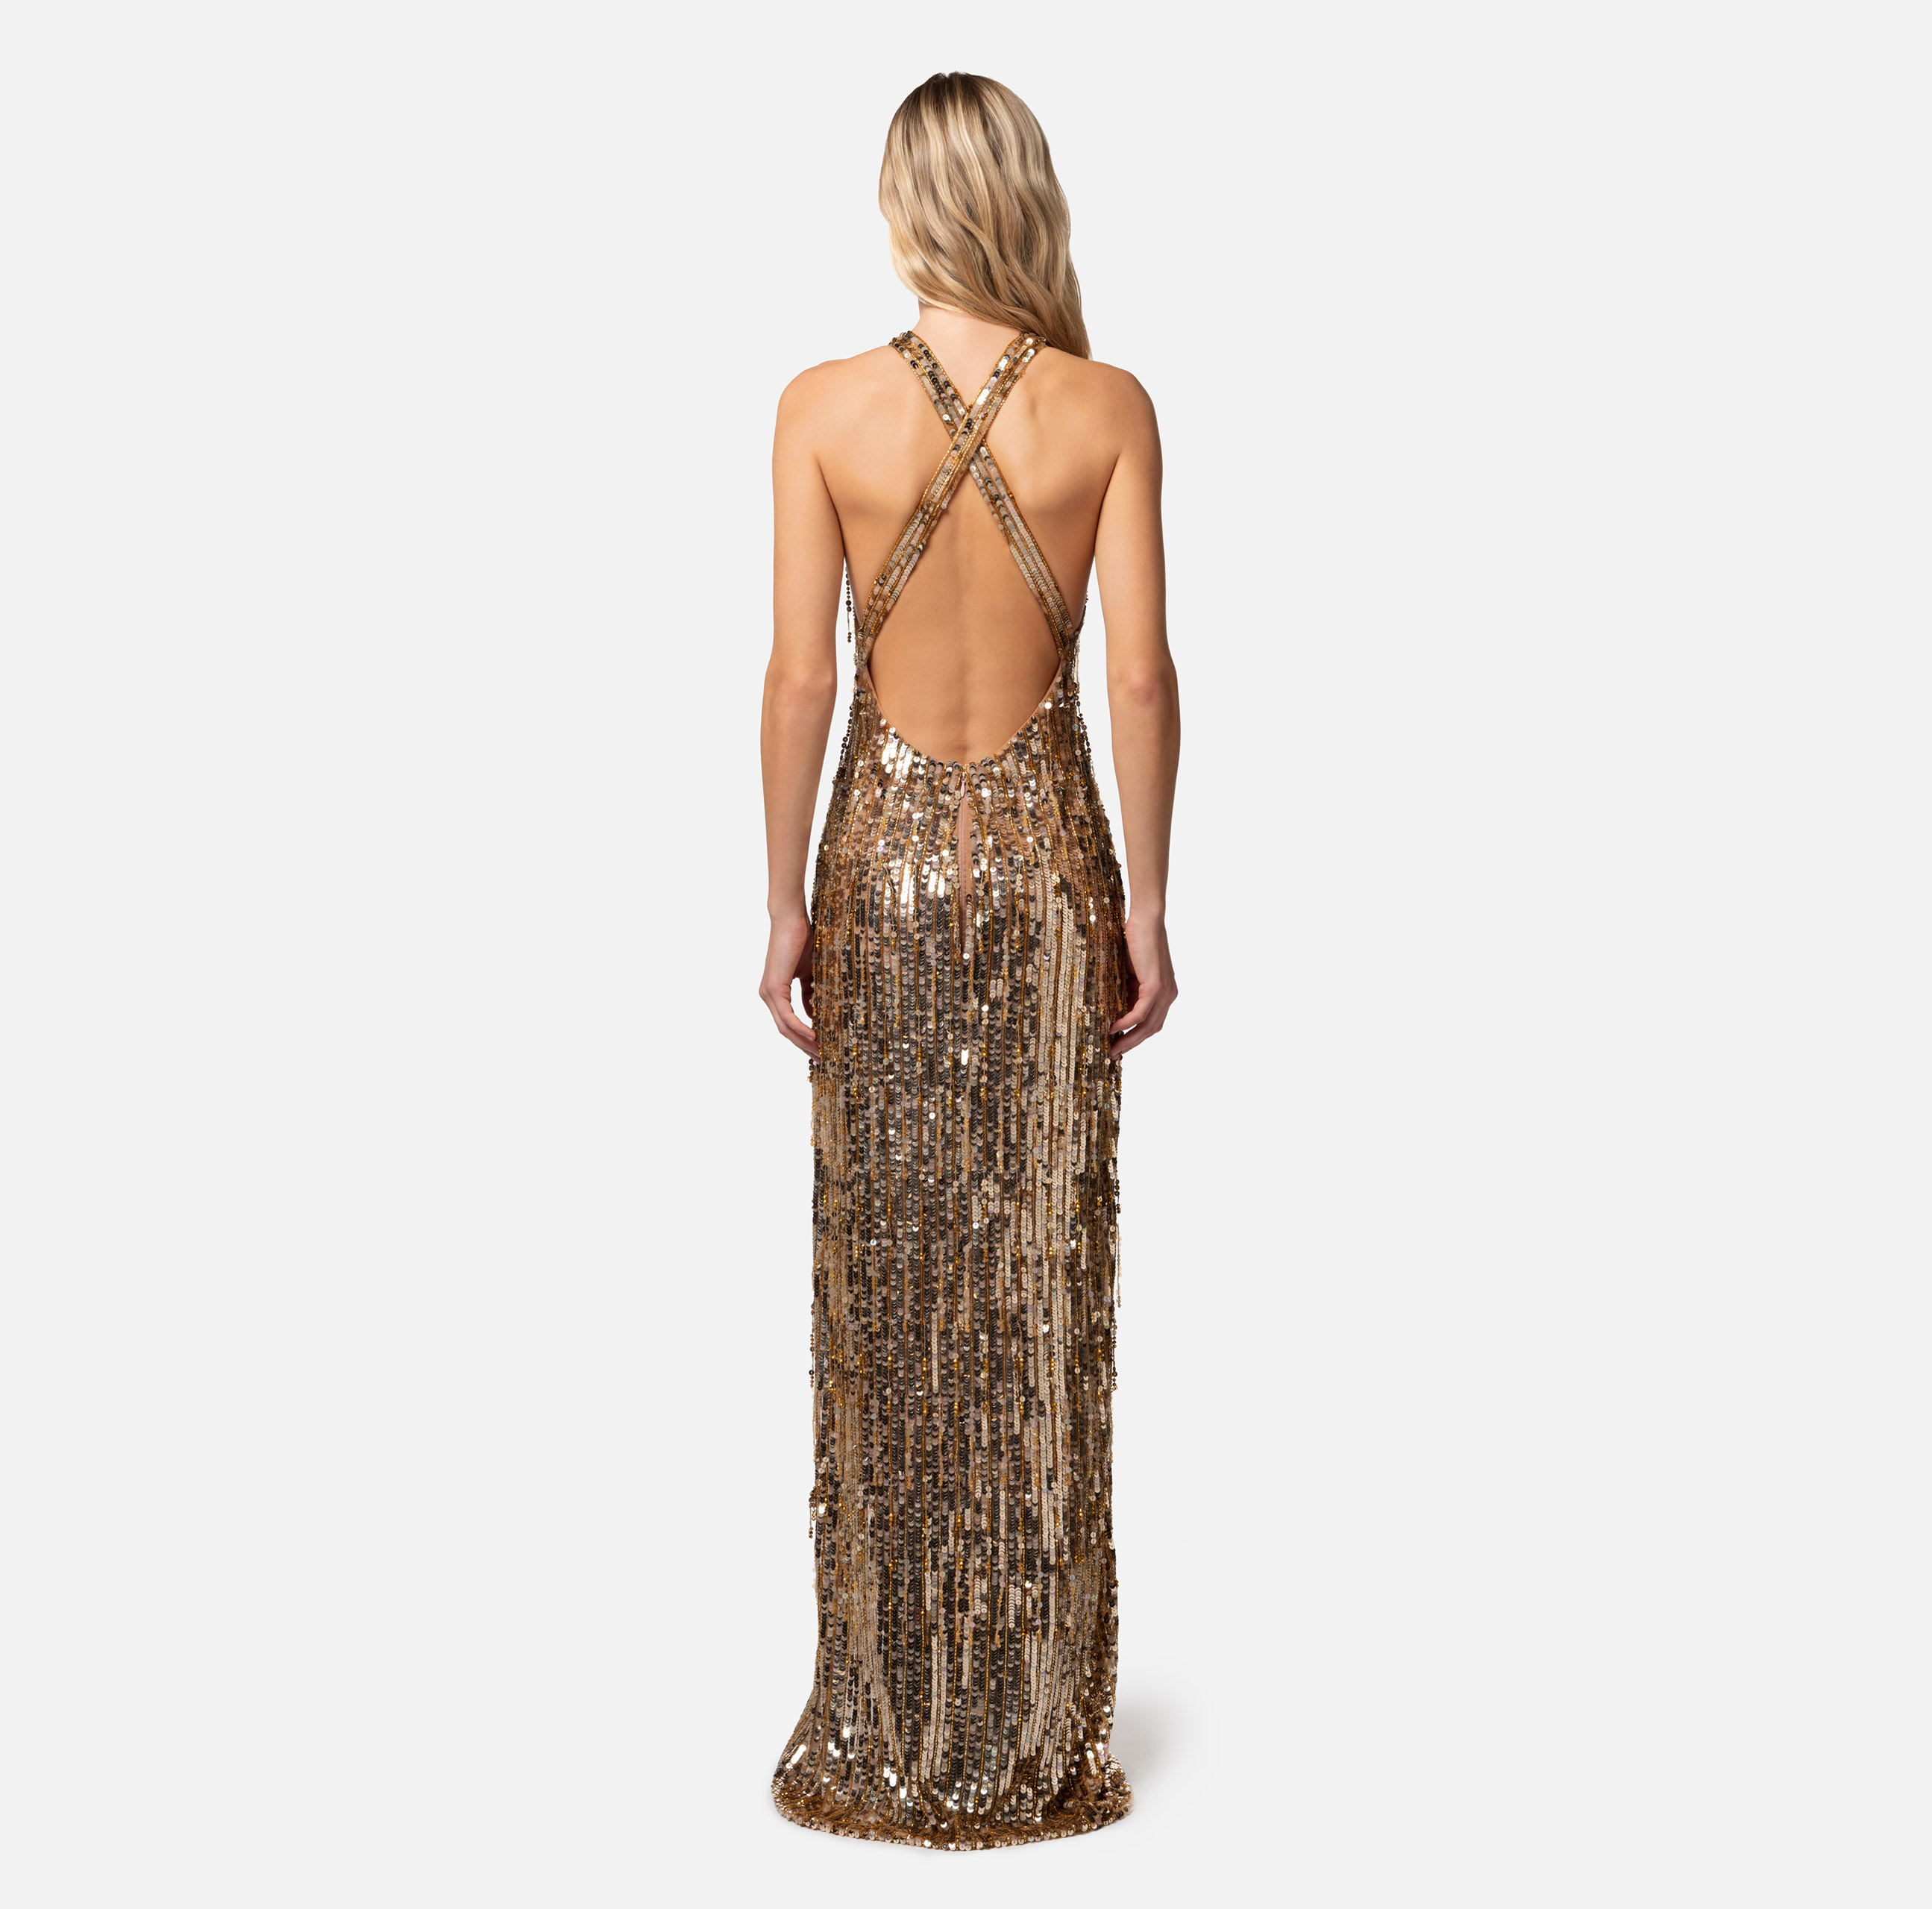 Red carpet dress with fringes made of beads and sequins - Elisabetta Franchi